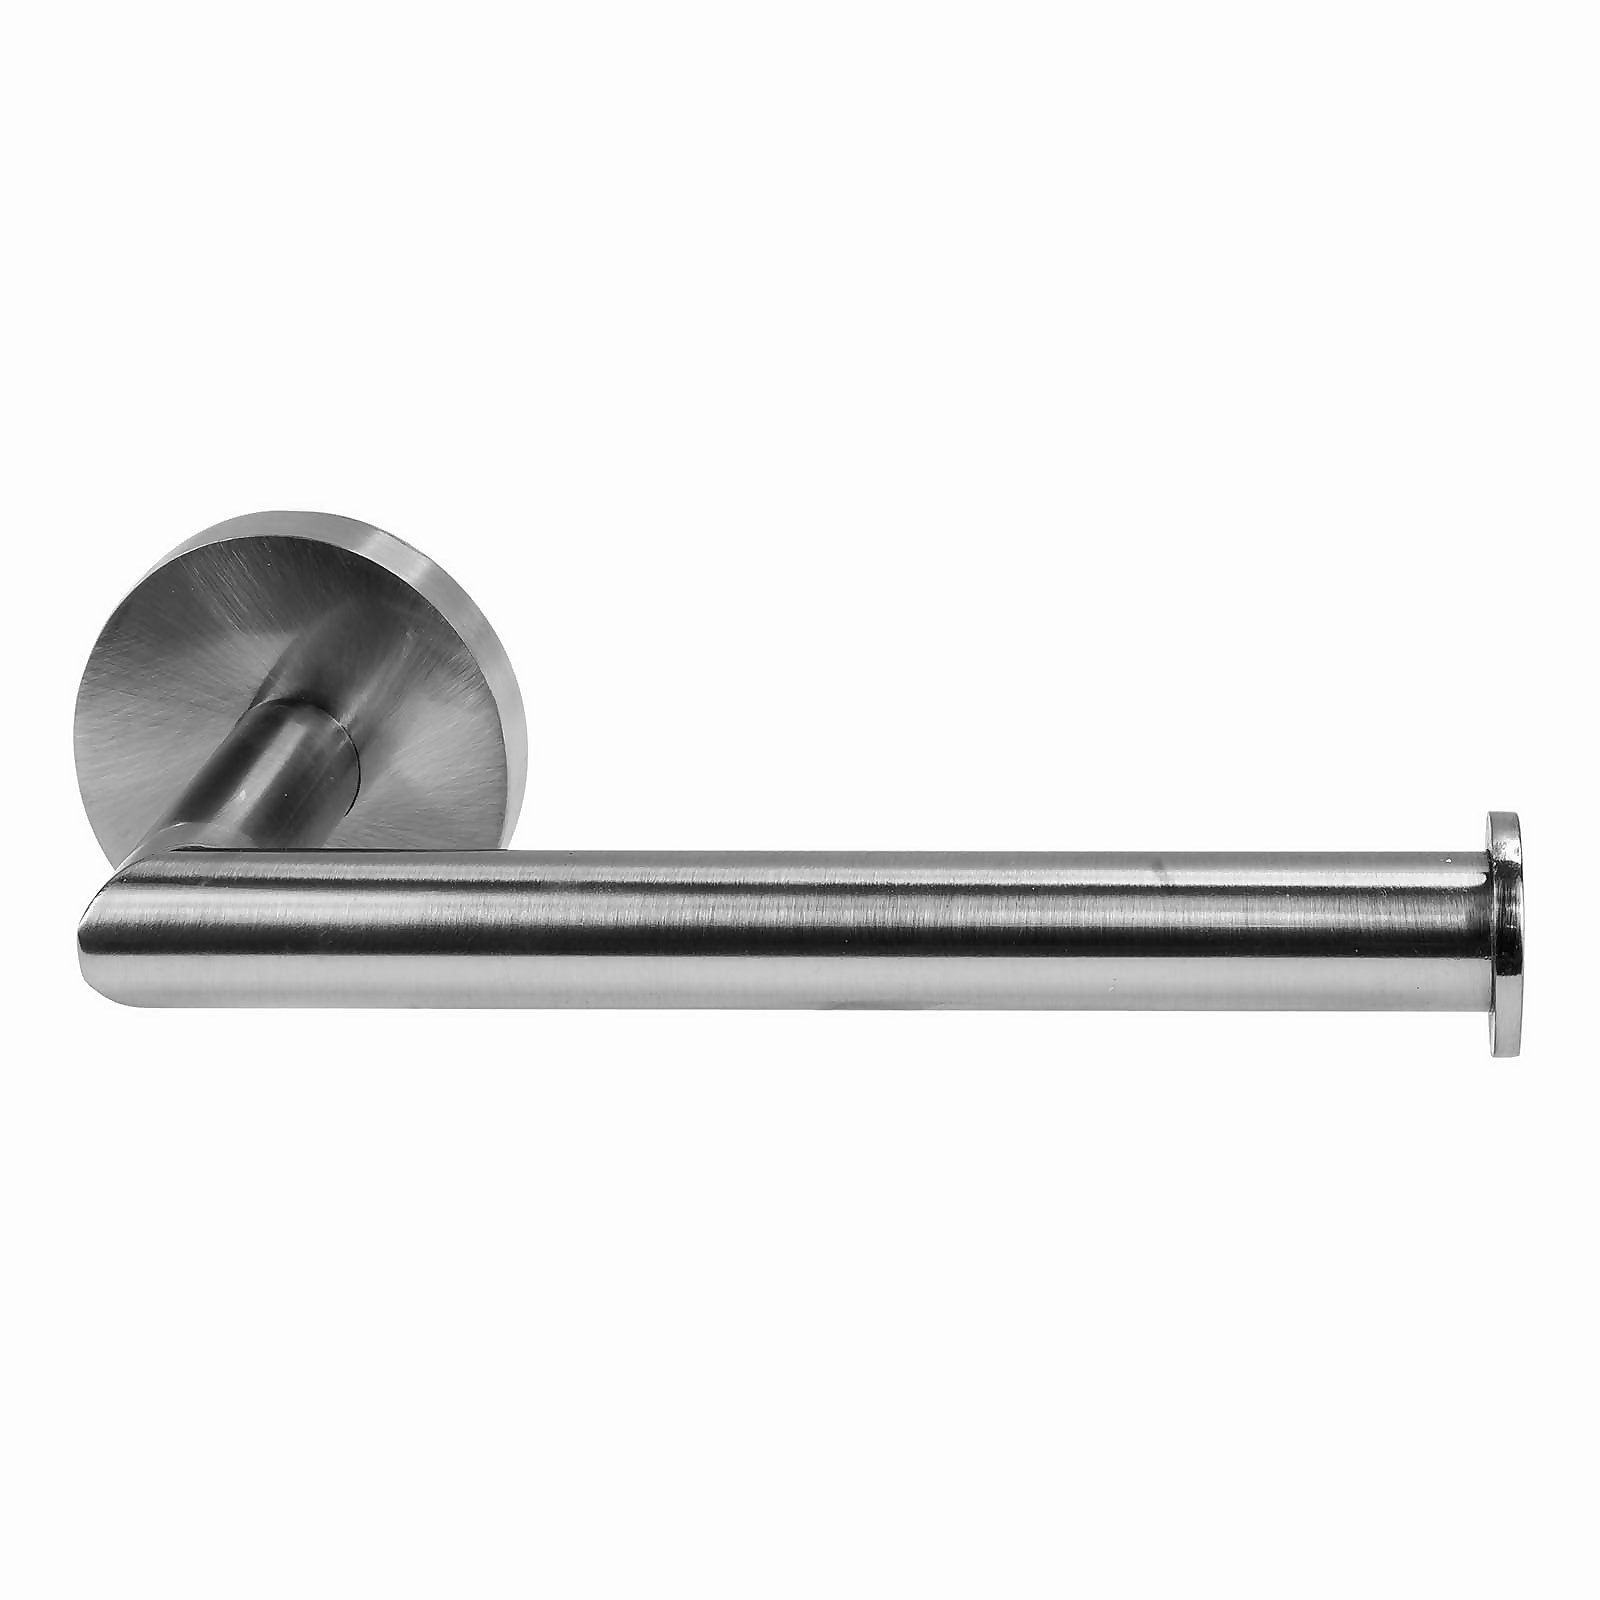 Photo of Self Adhesive Toilet Roll Holder - Stainless Steel